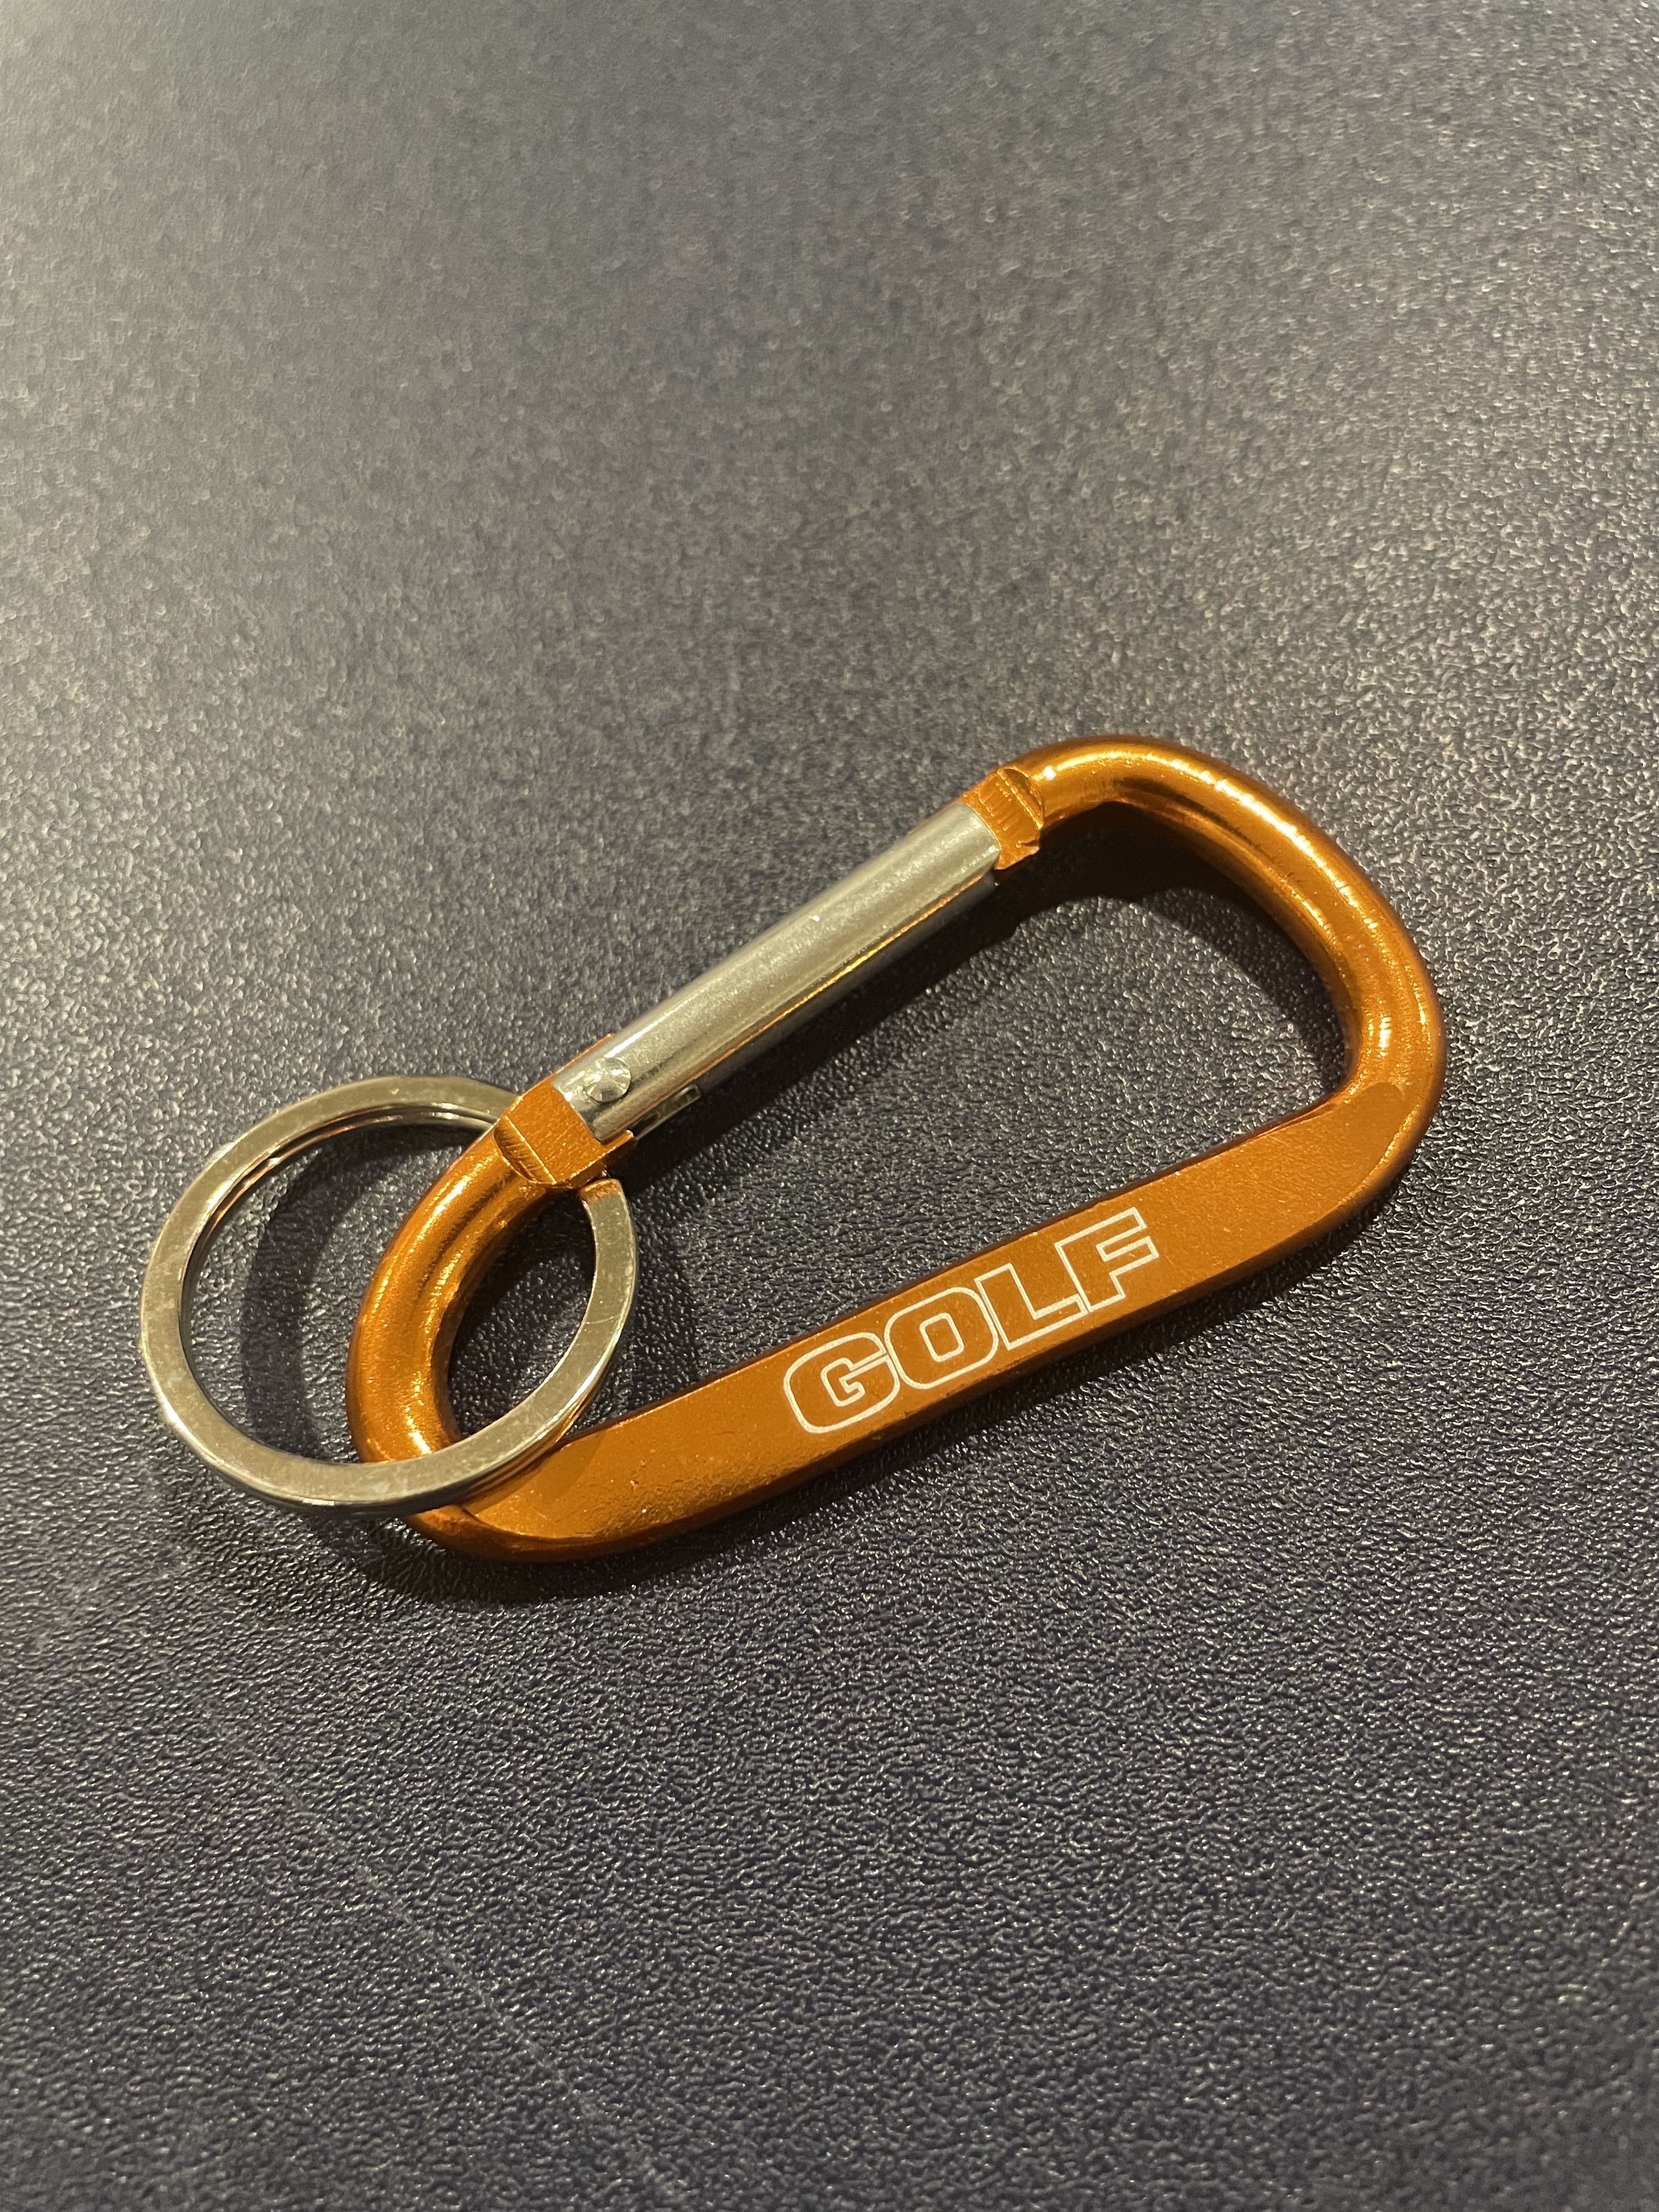 Golf Wang Golf Wang Carabiner - Orange Size ONE SIZE - 1 Preview